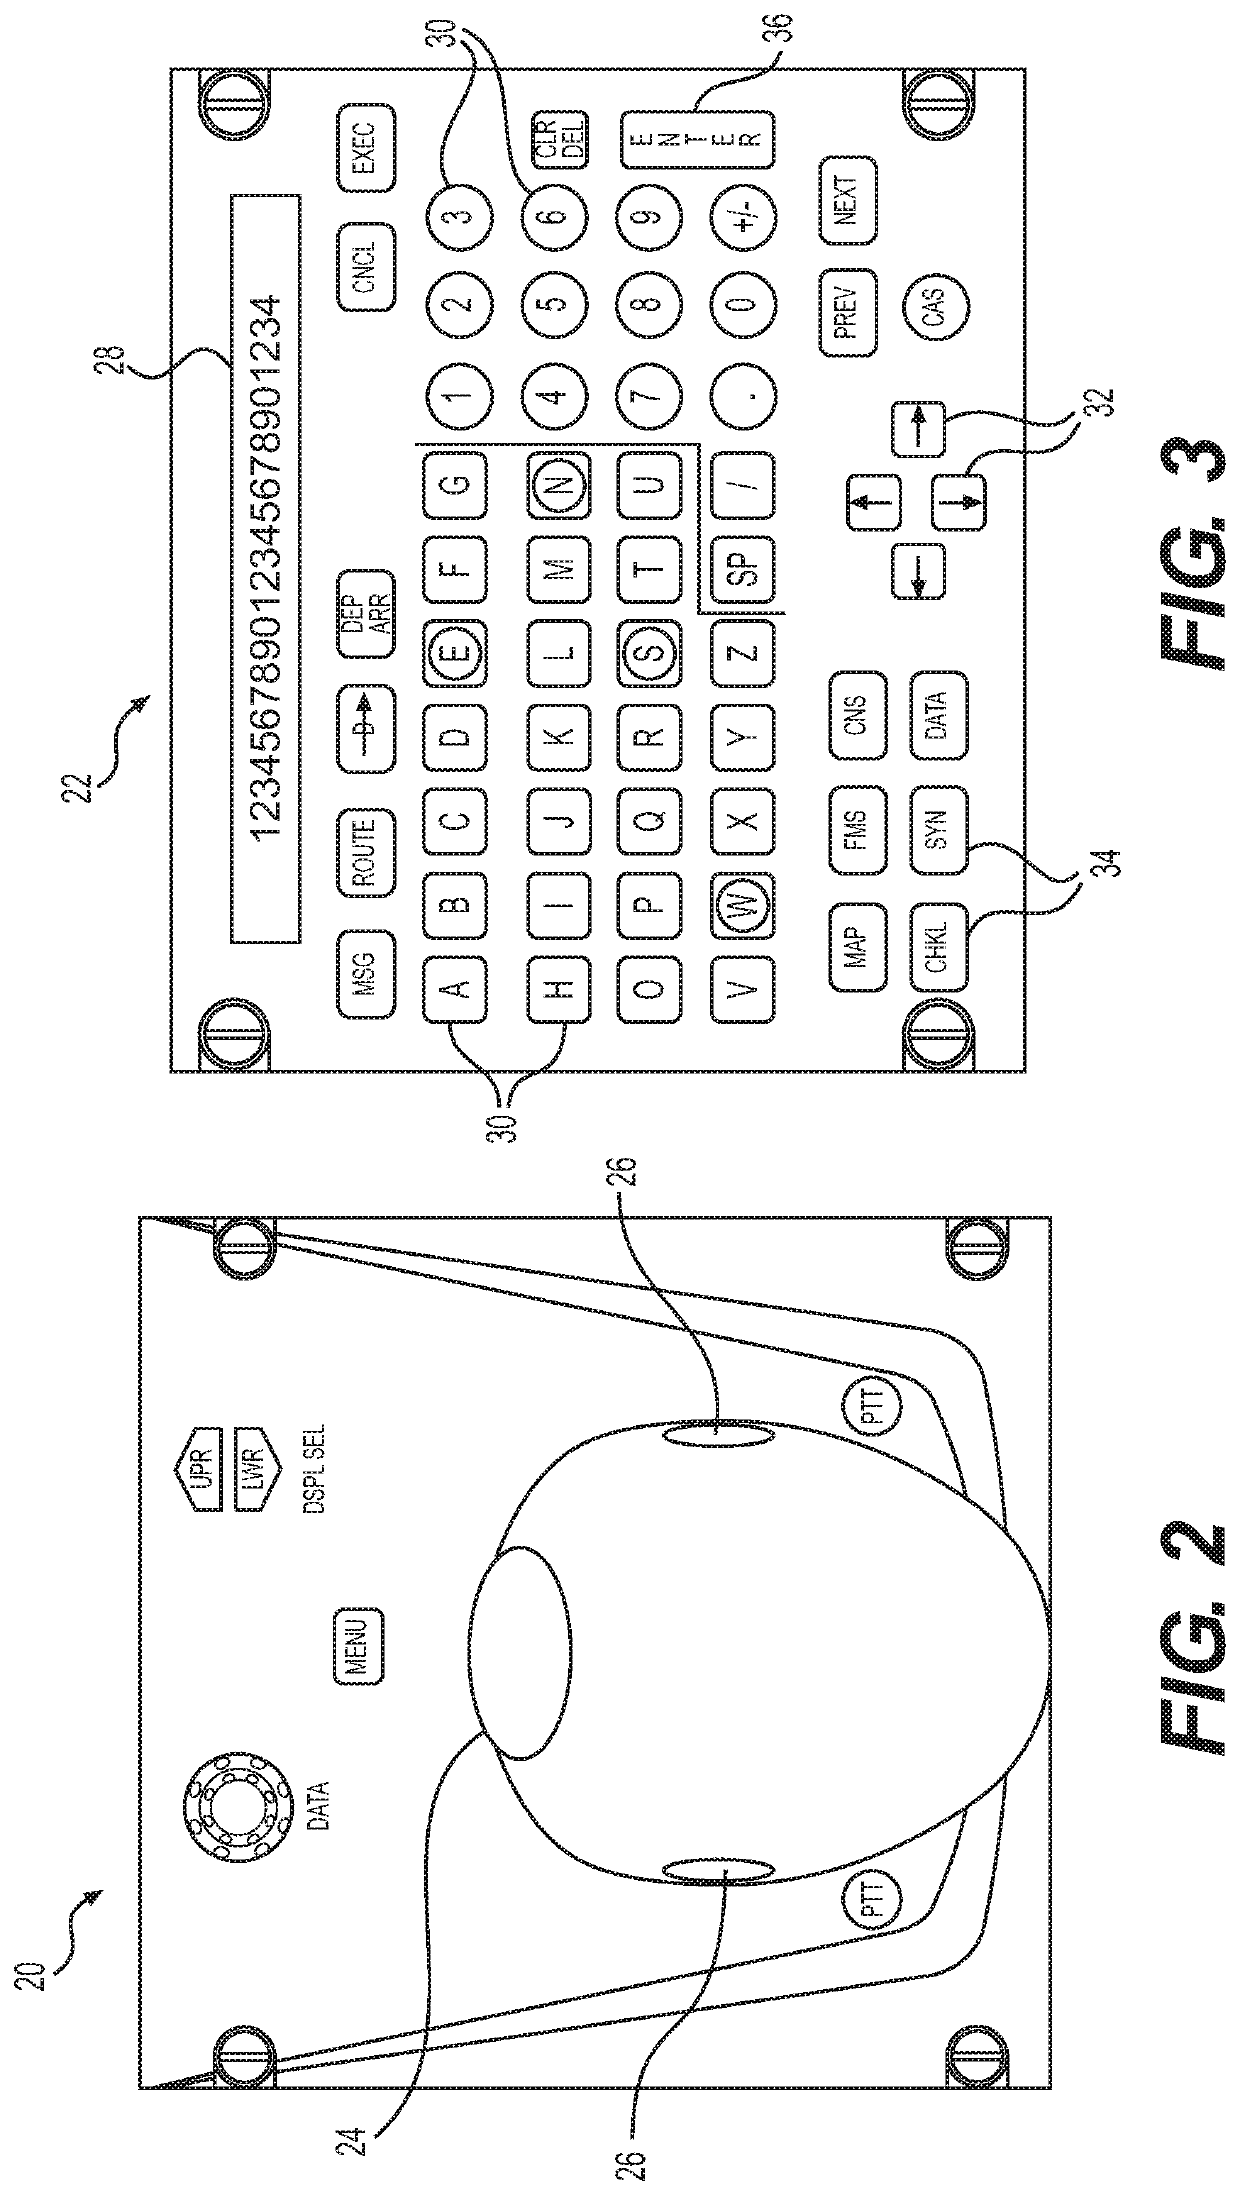 Cursor control for aircraft display device